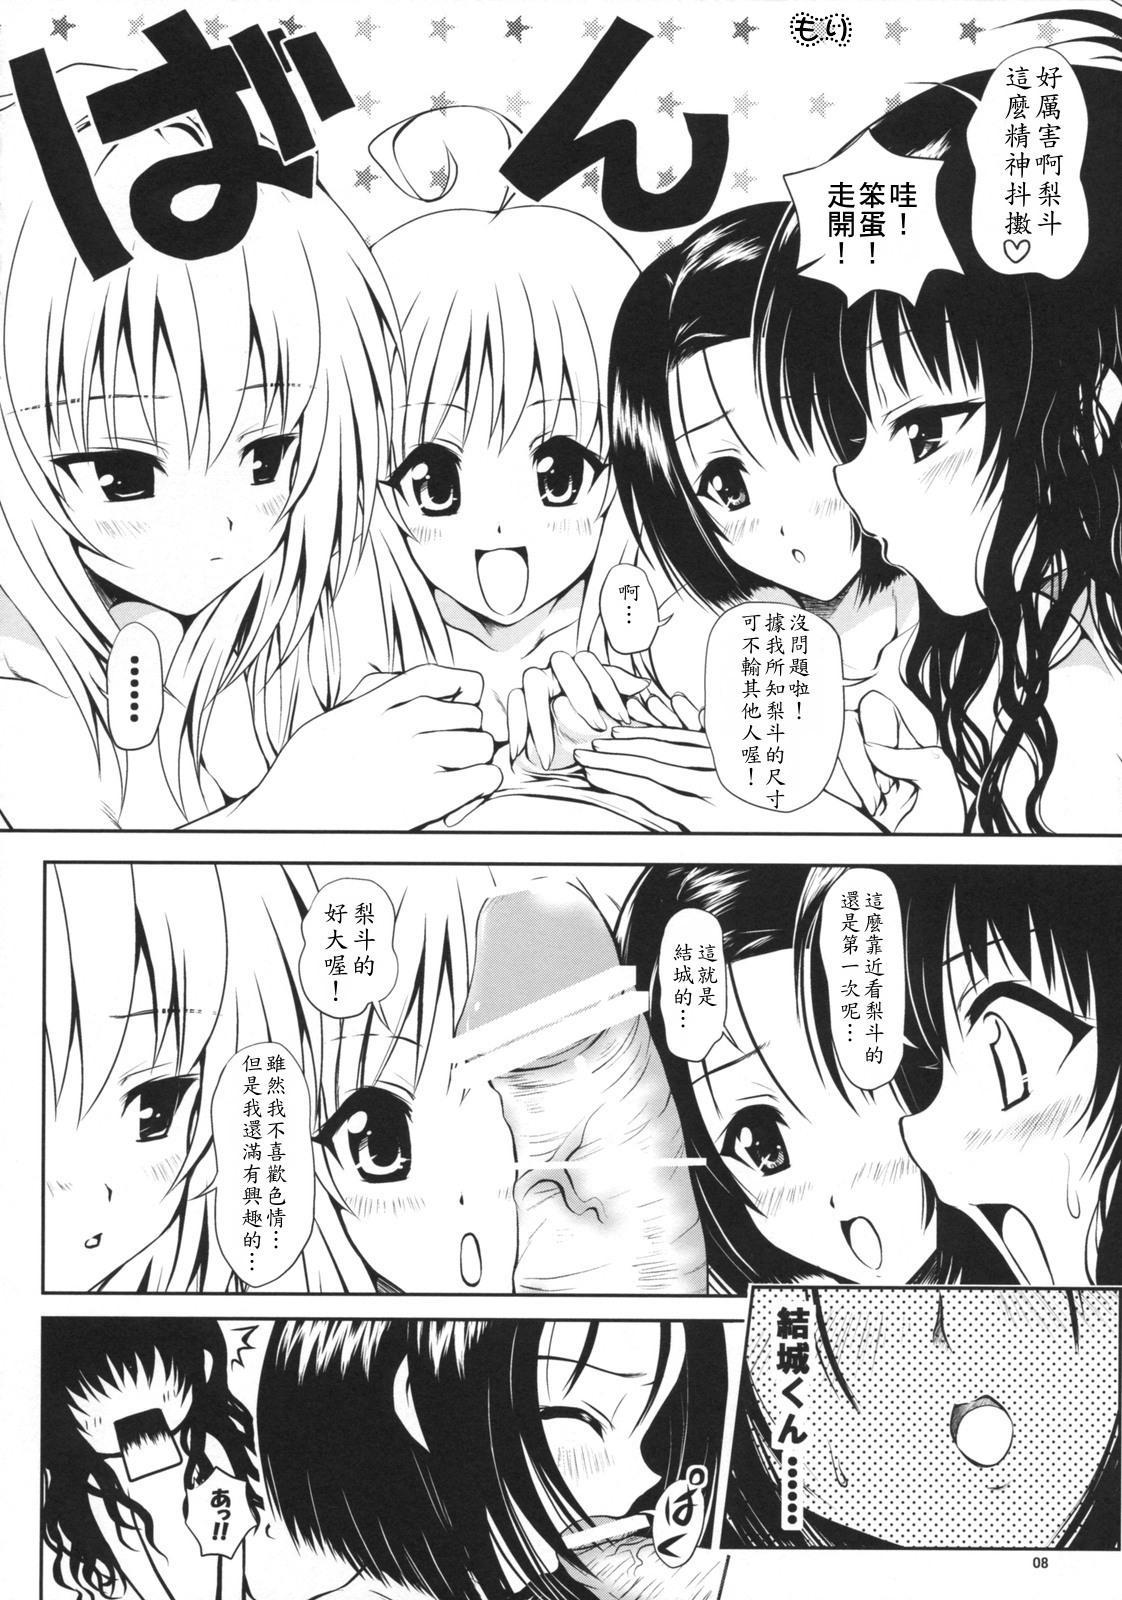 Trimmed TryLOVE-ru - To love ru Girl Sucking Dick - Page 7